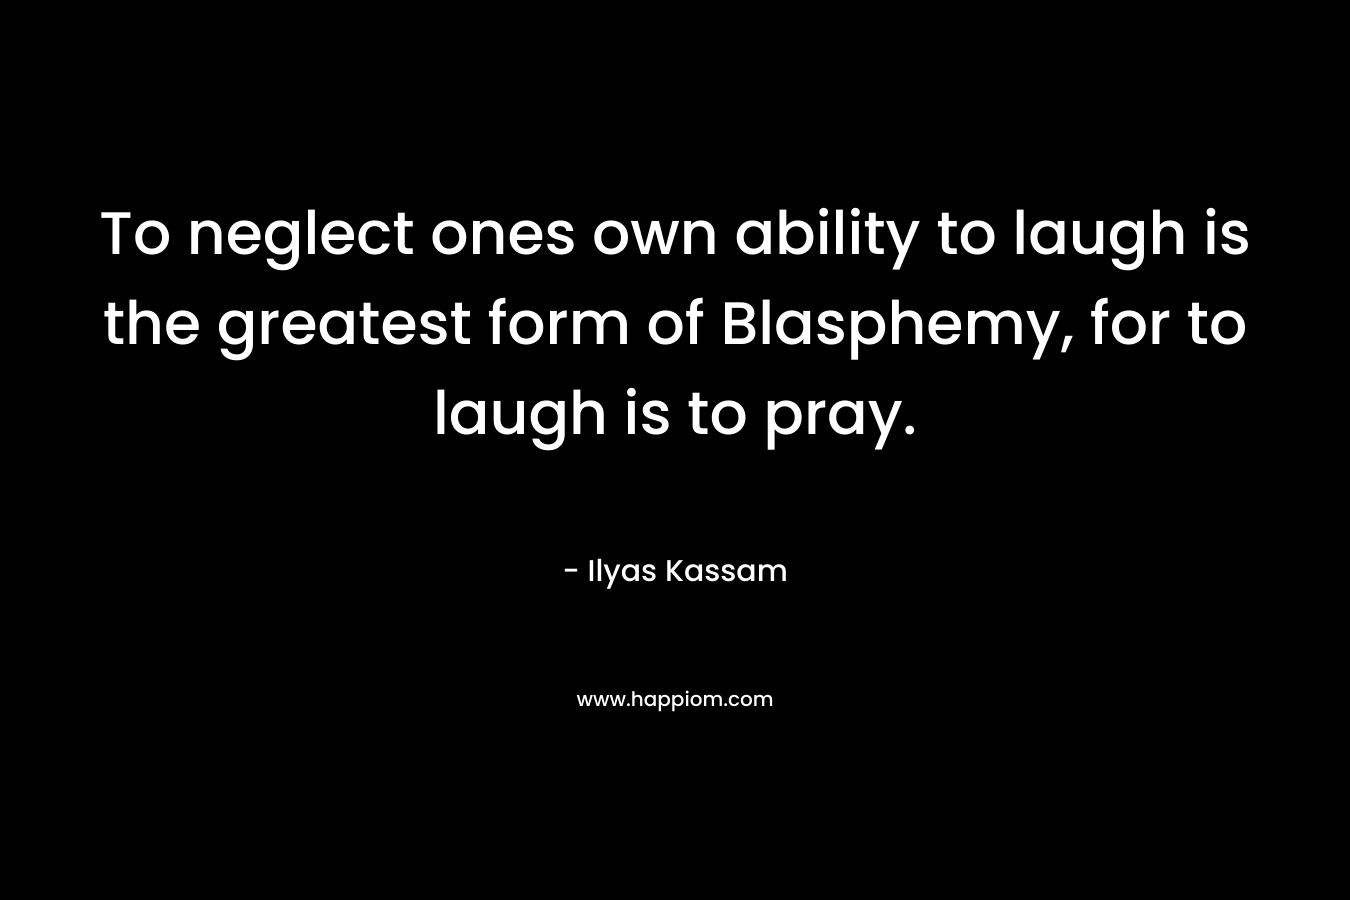 To neglect ones own ability to laugh is the greatest form of Blasphemy, for to laugh is to pray. – Ilyas Kassam